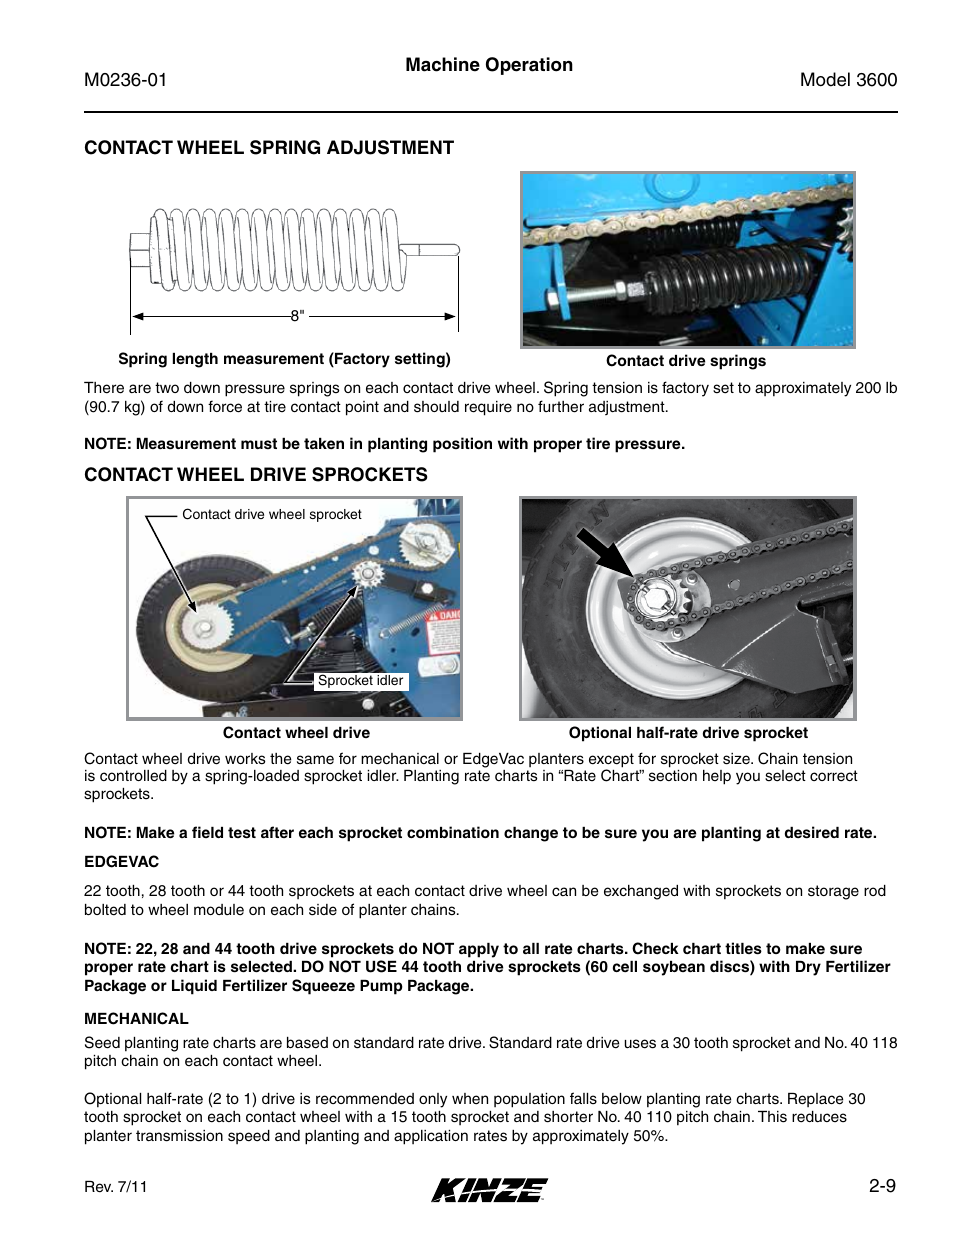 Contact wheel spring adjustment, Contact wheel drive sprockets, Contact wheel spring adjustment -9 | Contact wheel drive sprockets -9 | Kinze 3600 Lift and Rotate Planter Rev. 7/14 User Manual | Page 19 / 172